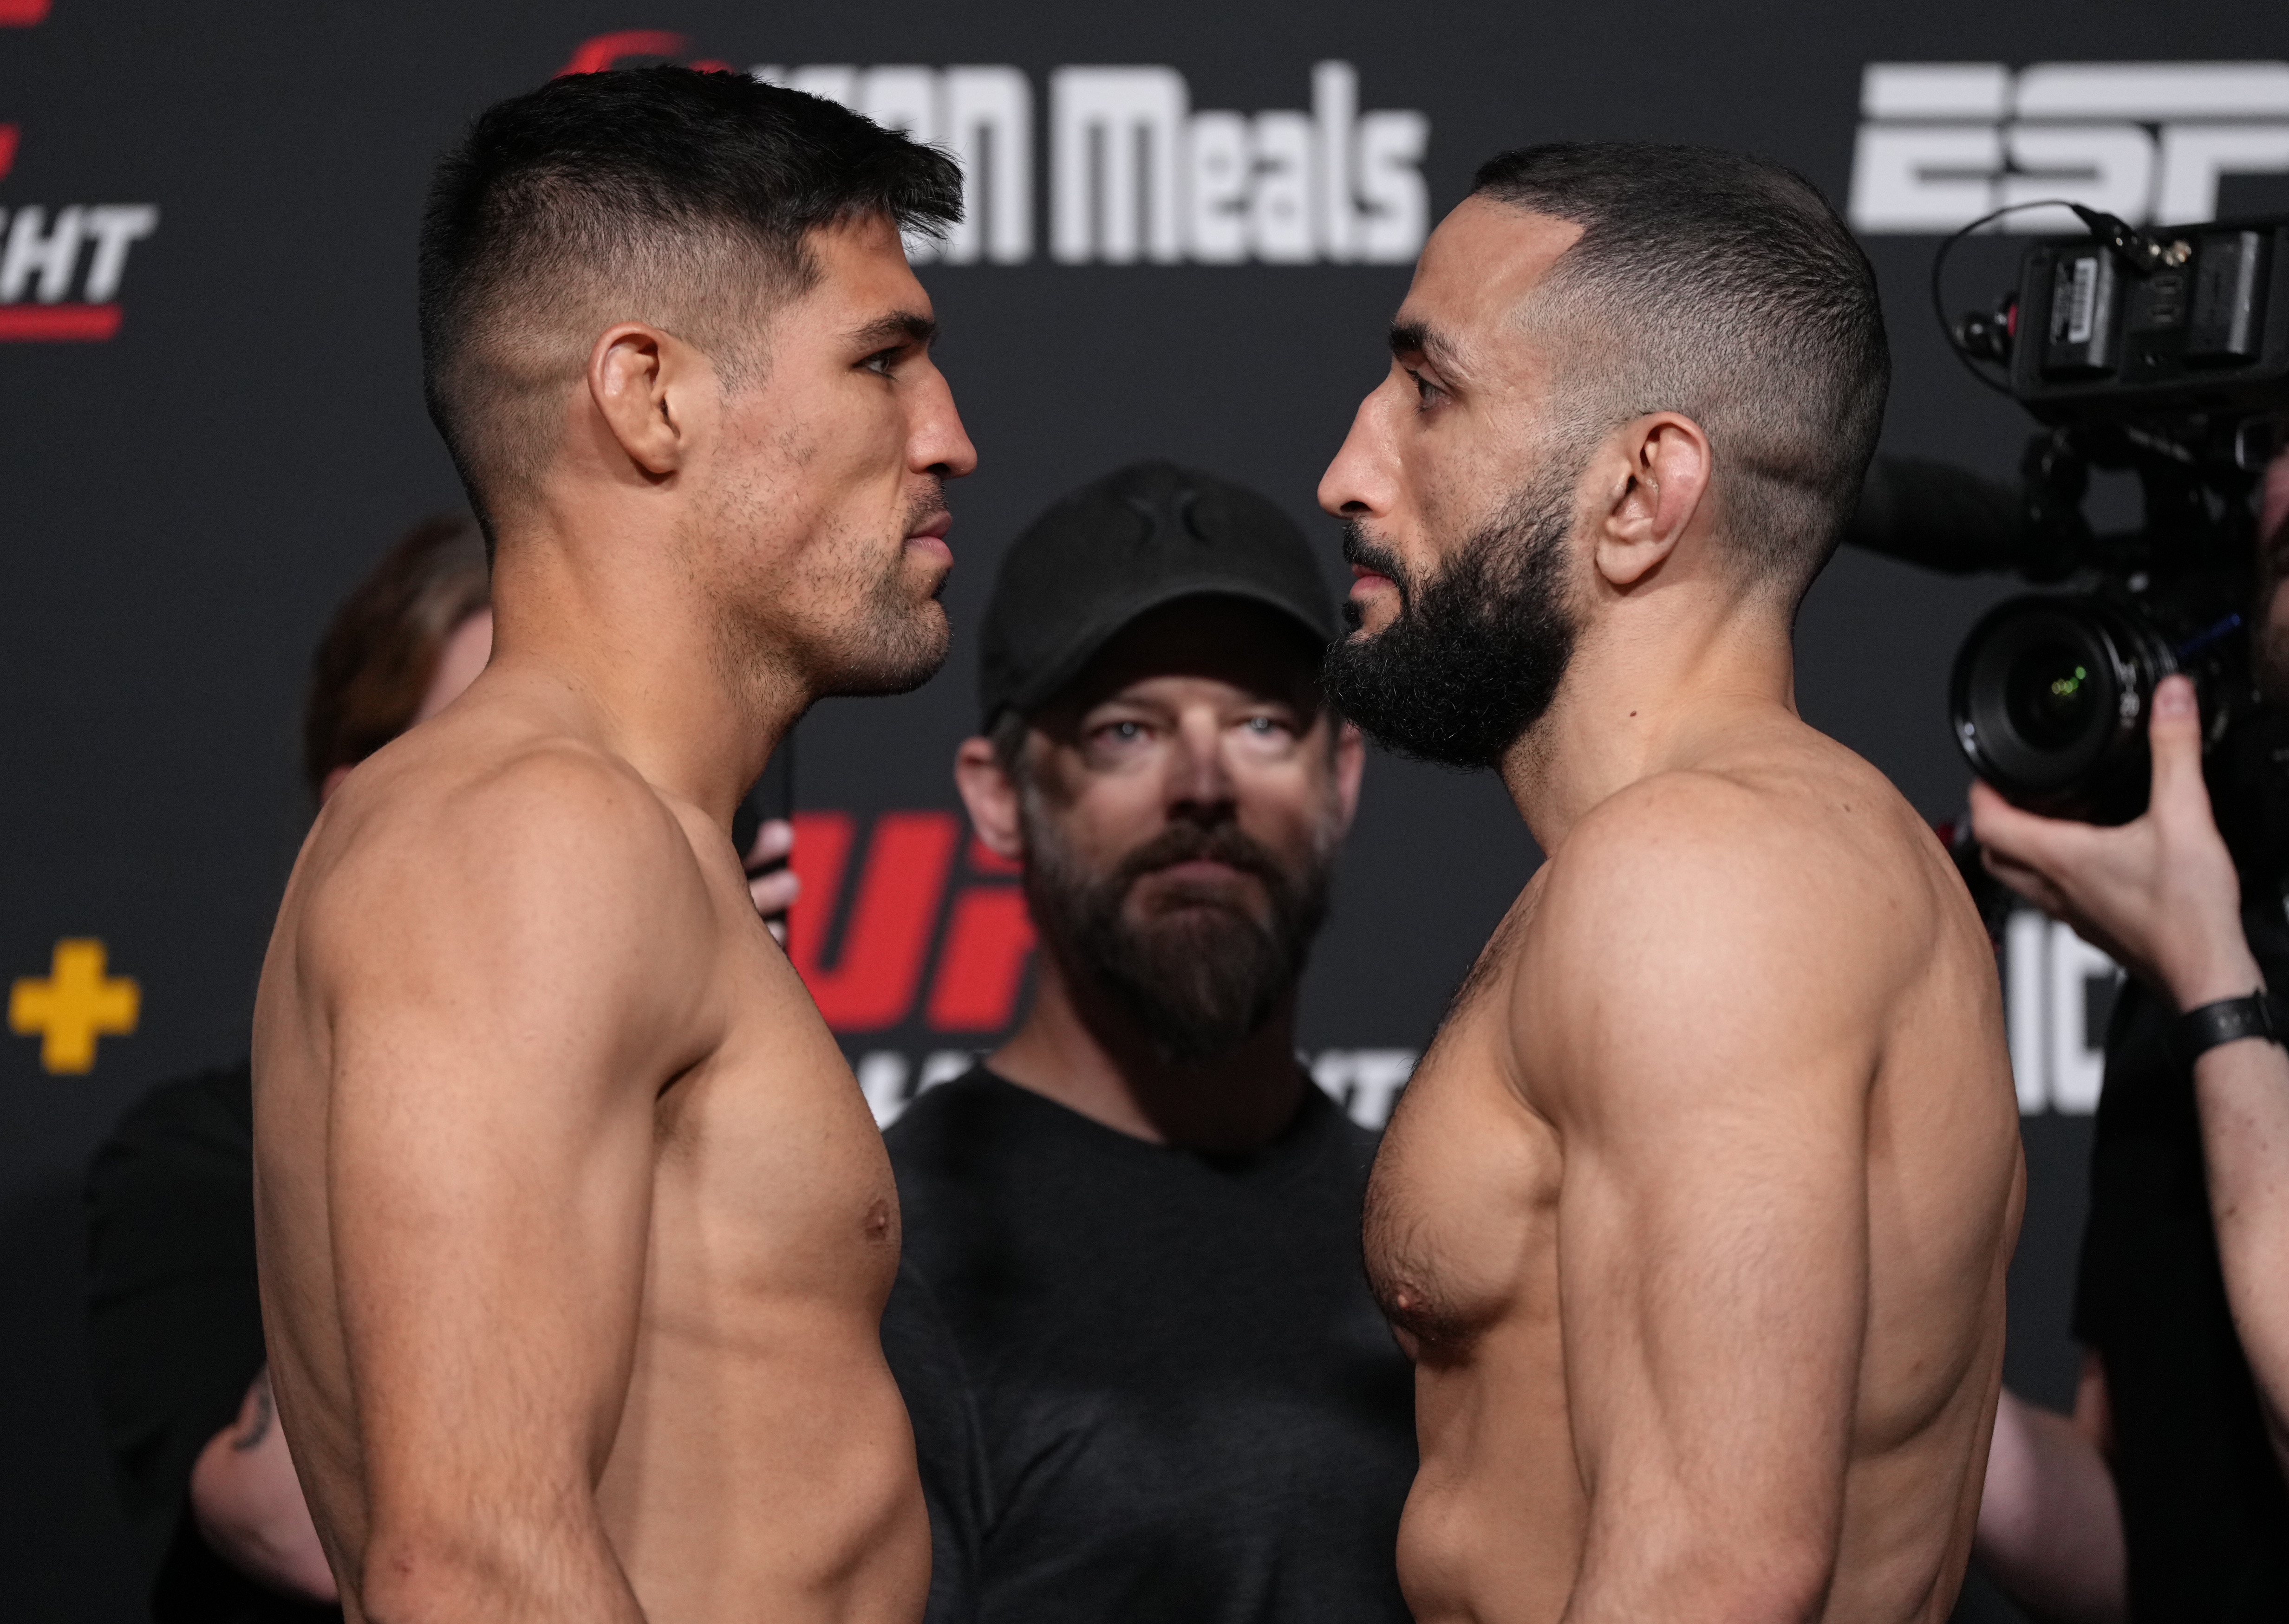 Vicente Luque and Belal Muhammad face off during the UFC weigh-in at UFC APEX on April 15, 2022 in Las Vegas, Nevada.